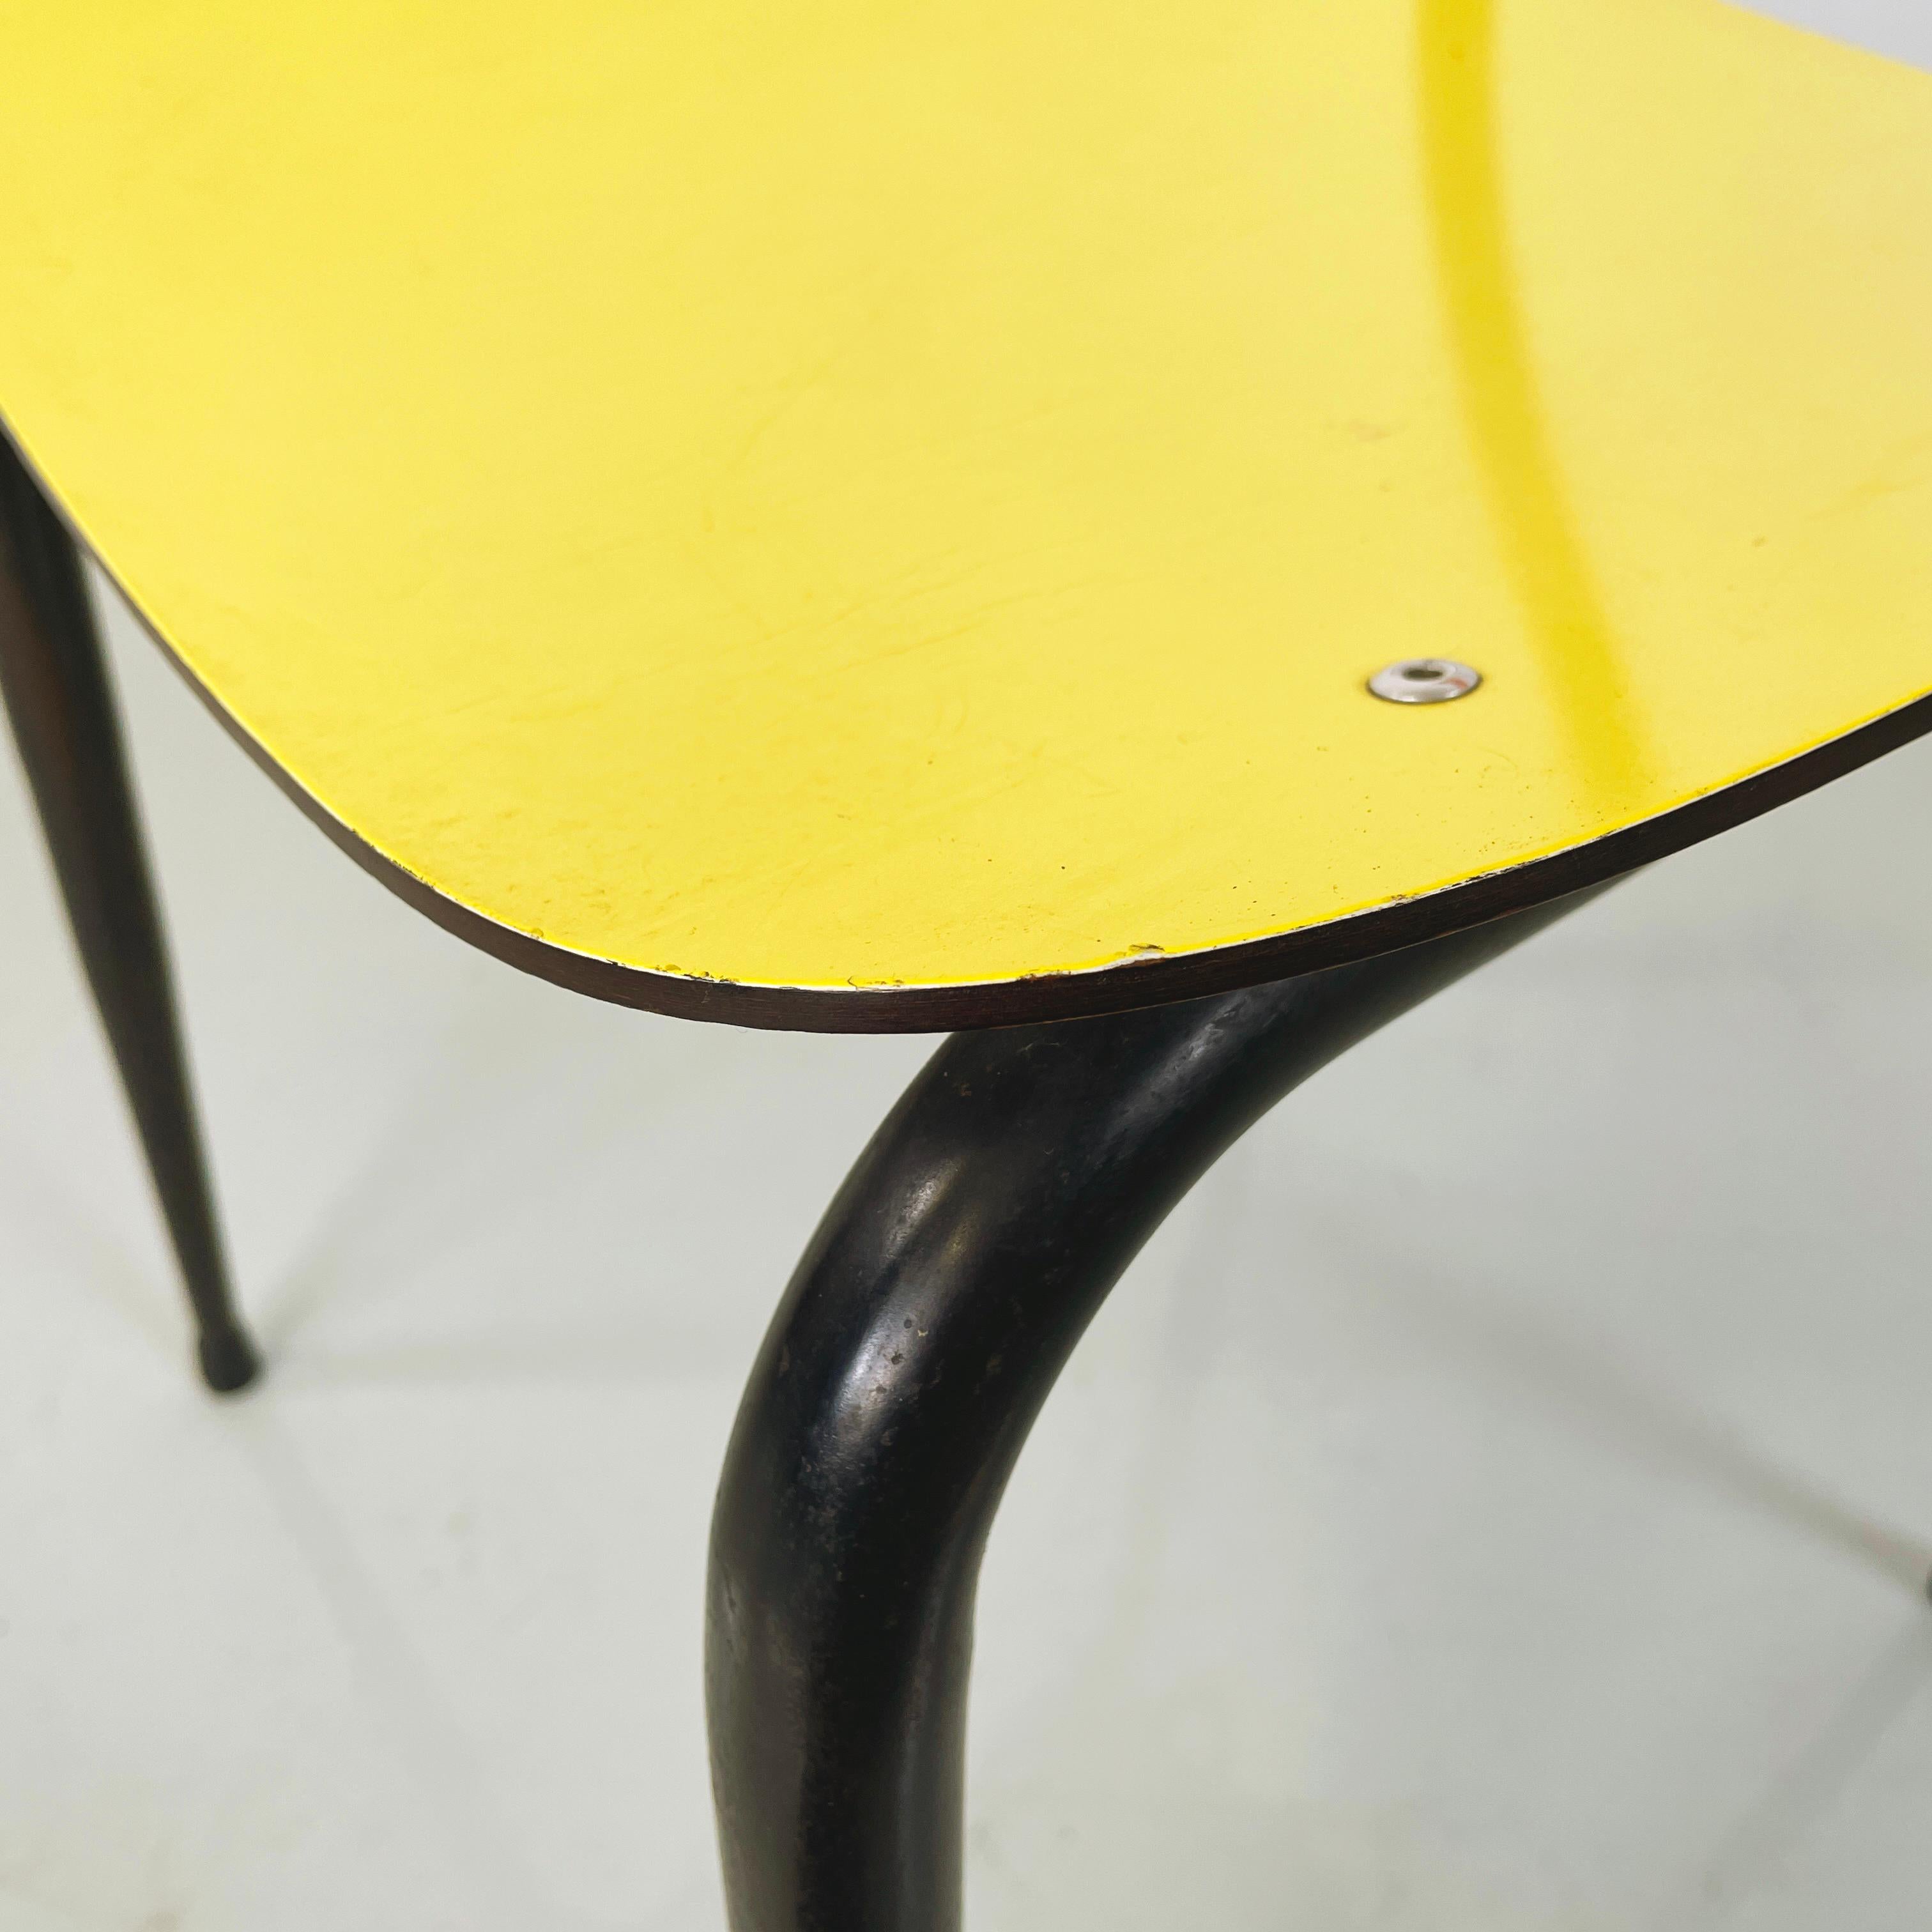 Italian mid-century Chairs Paulista in yellow, red, black formica metal, 1960s For Sale 7